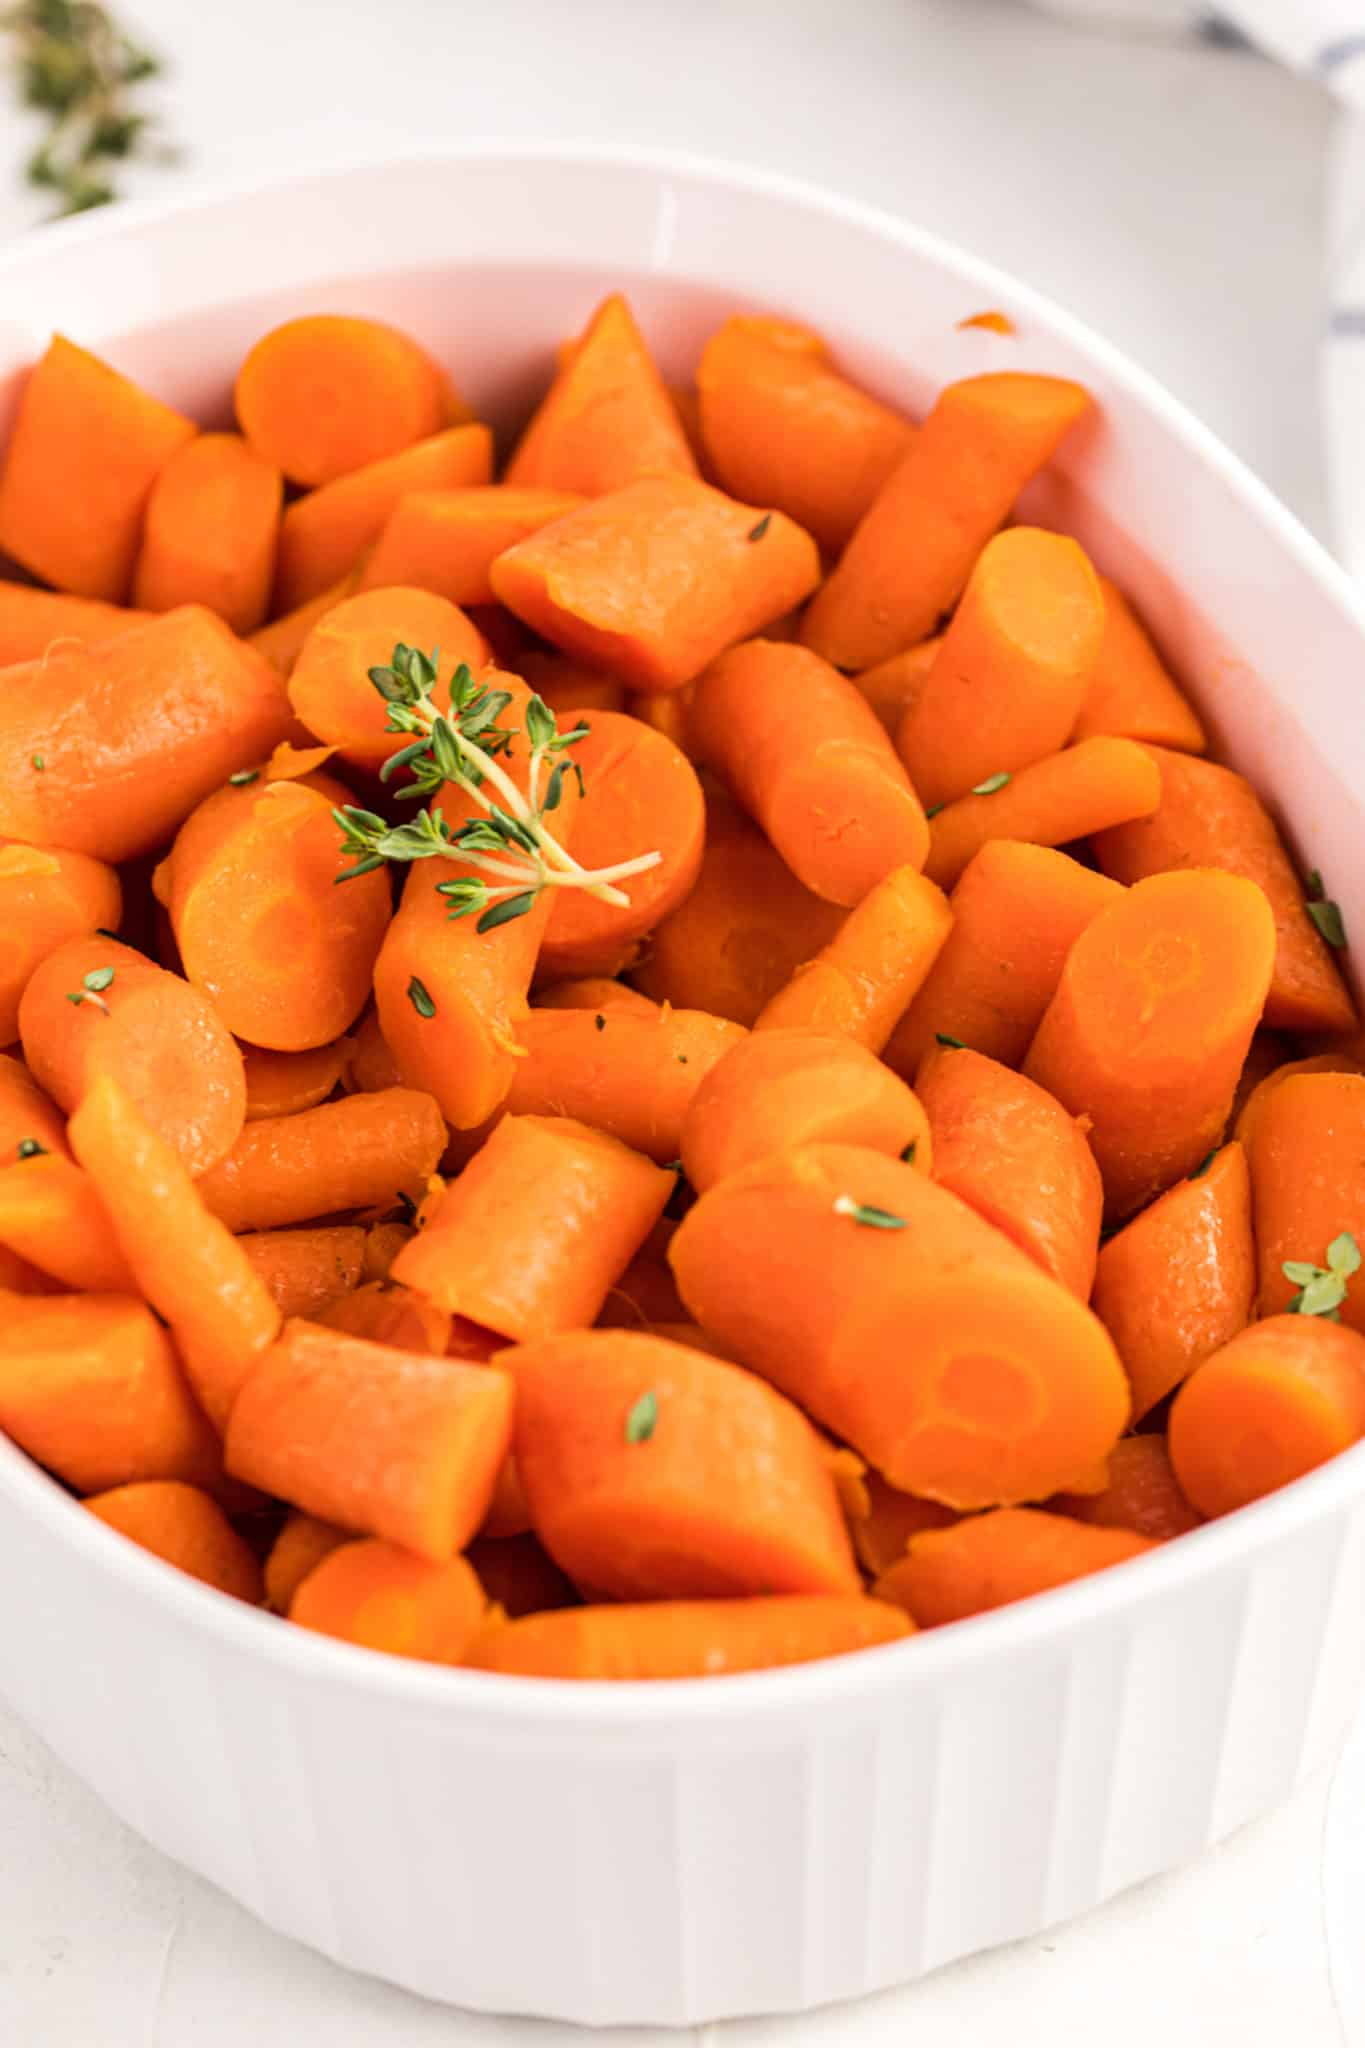 A close up of cooked carrots